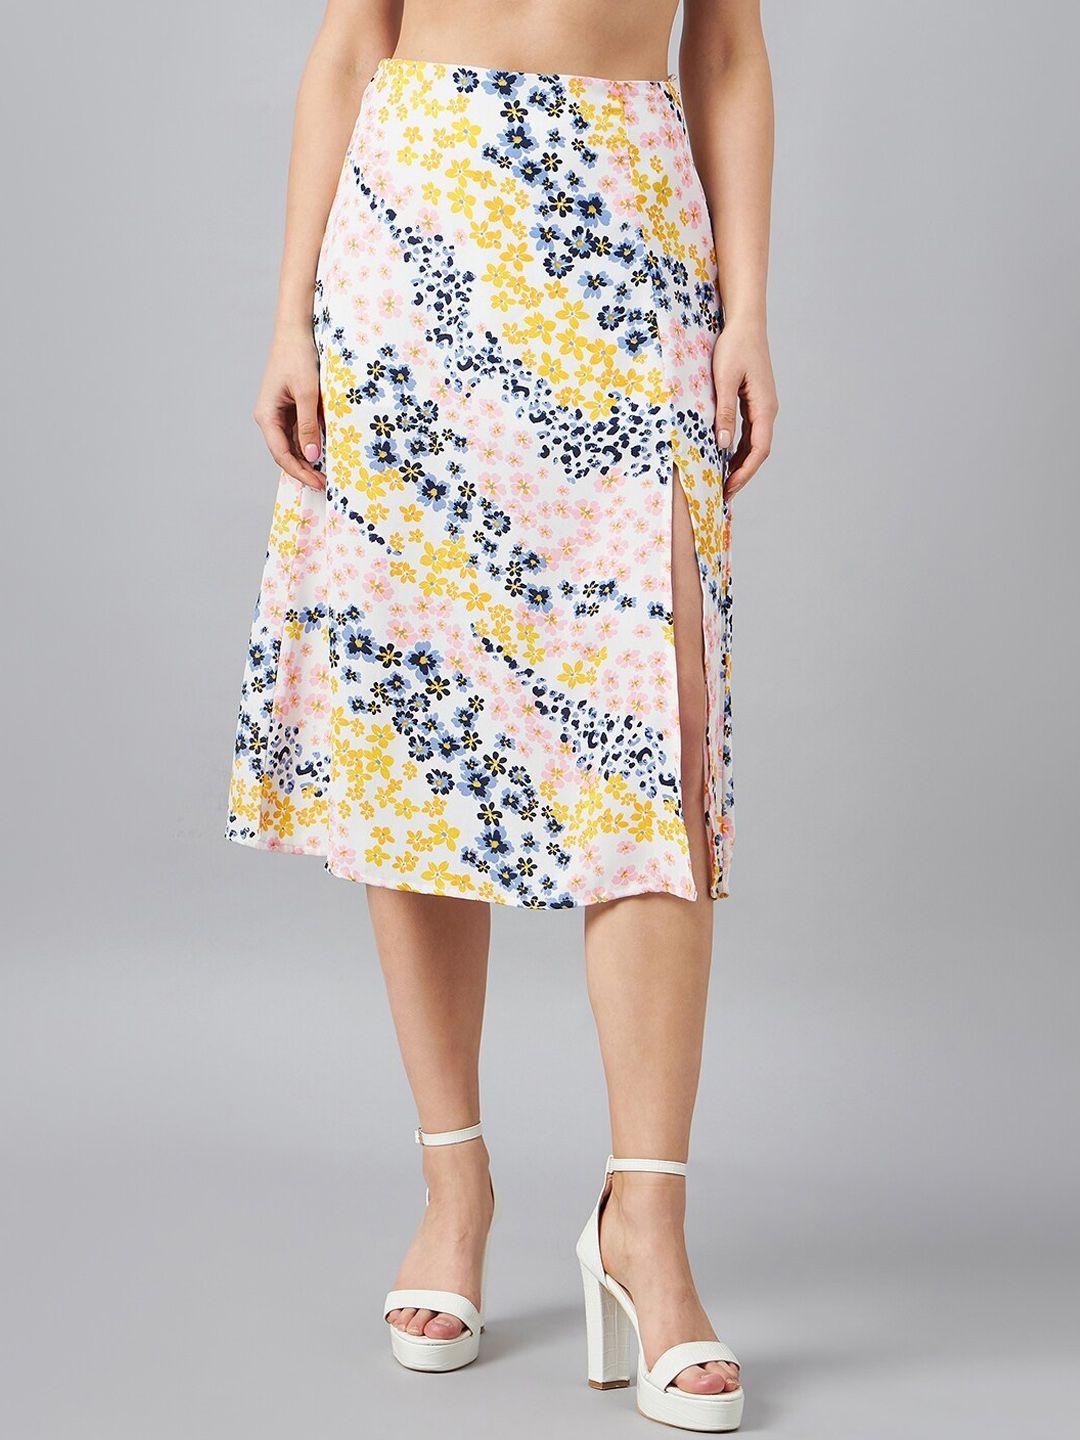 marie claire printed a-line side slit skirt